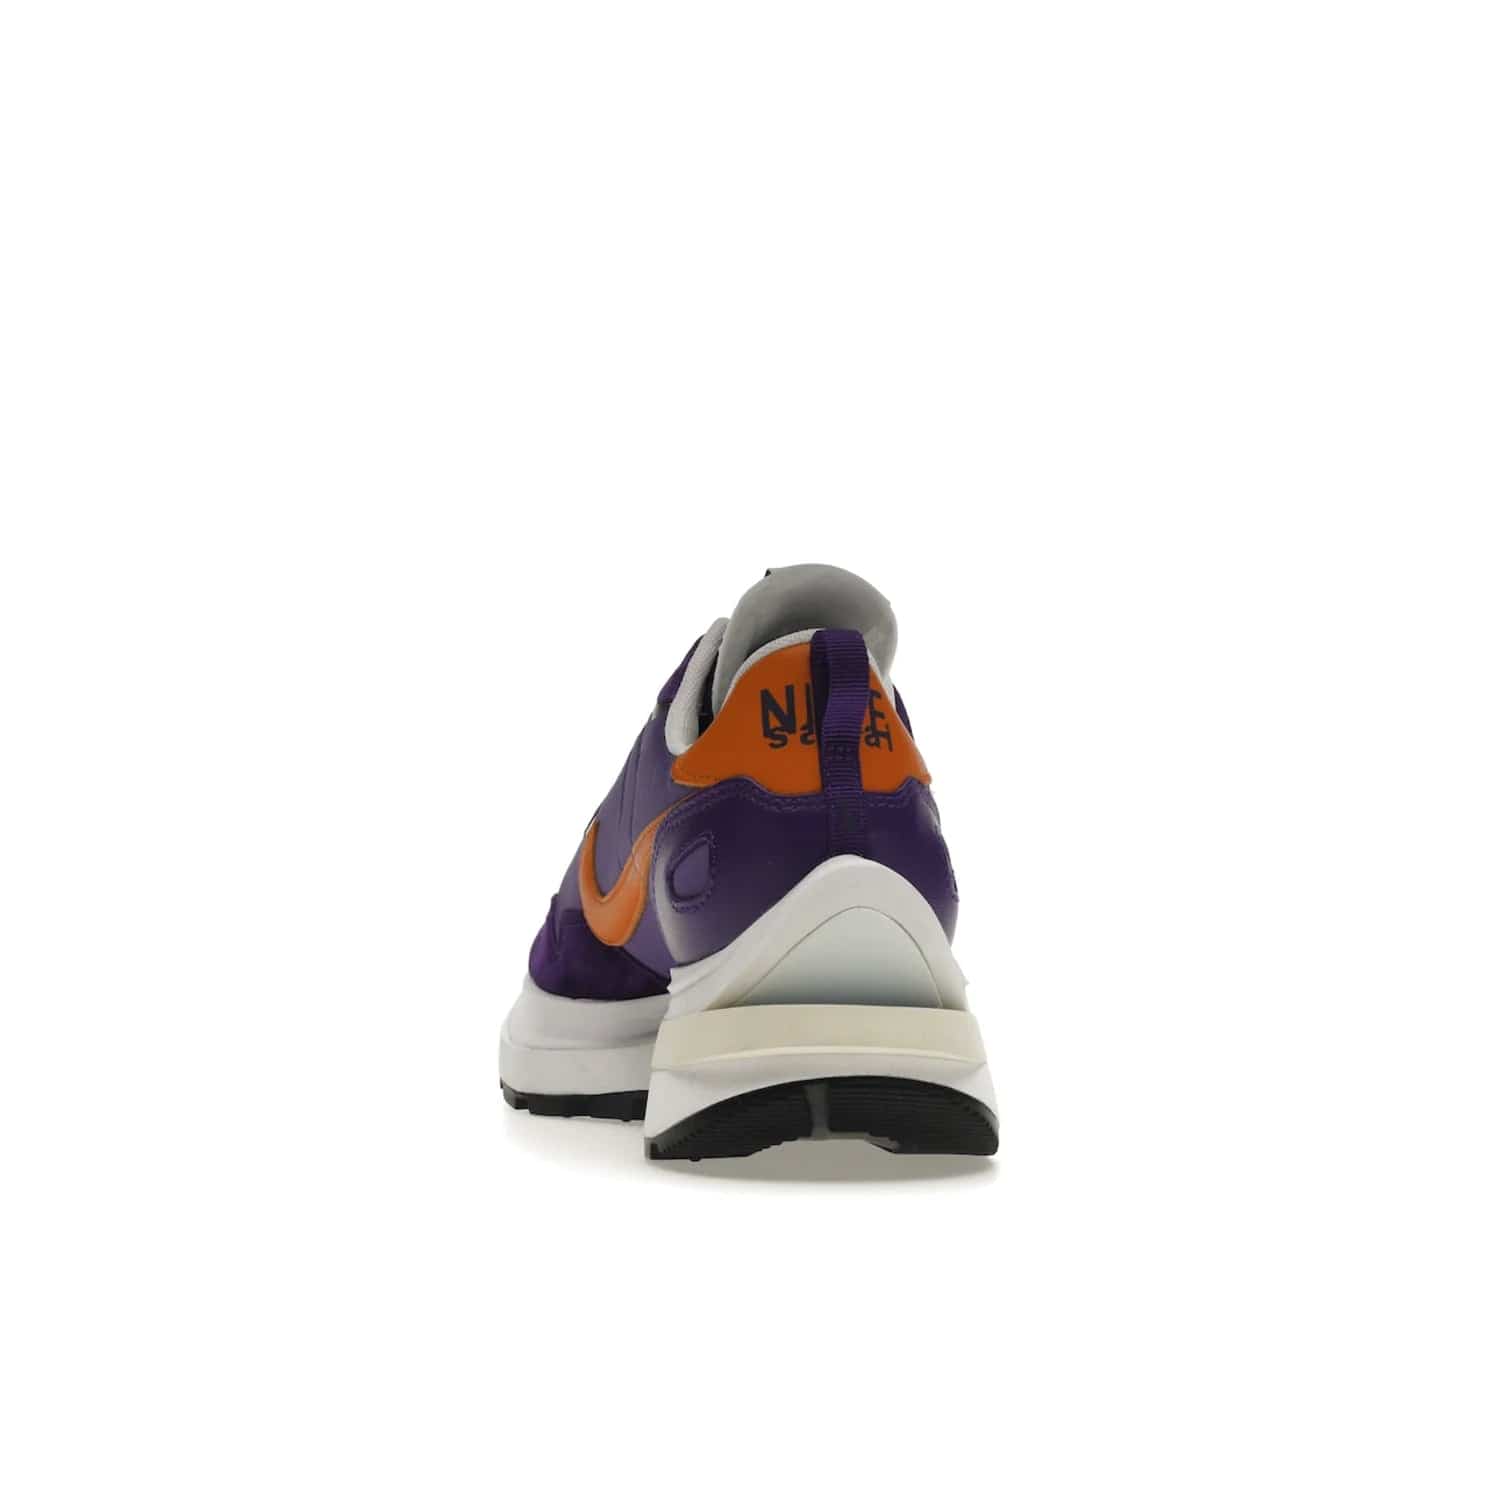 Nike Vaporwaffle sacai Dark Iris - Image 27 - Only at www.BallersClubKickz.com - Unique Nike Vaporwaffle sacai Dark Iris collab. Suede, leather & textile upper with Orange accents. Dual tongues & midsoles. Woven labels & heel tabs branding. Colorway of Purple, Orange, White & Black. Must-have for any wardrobe.